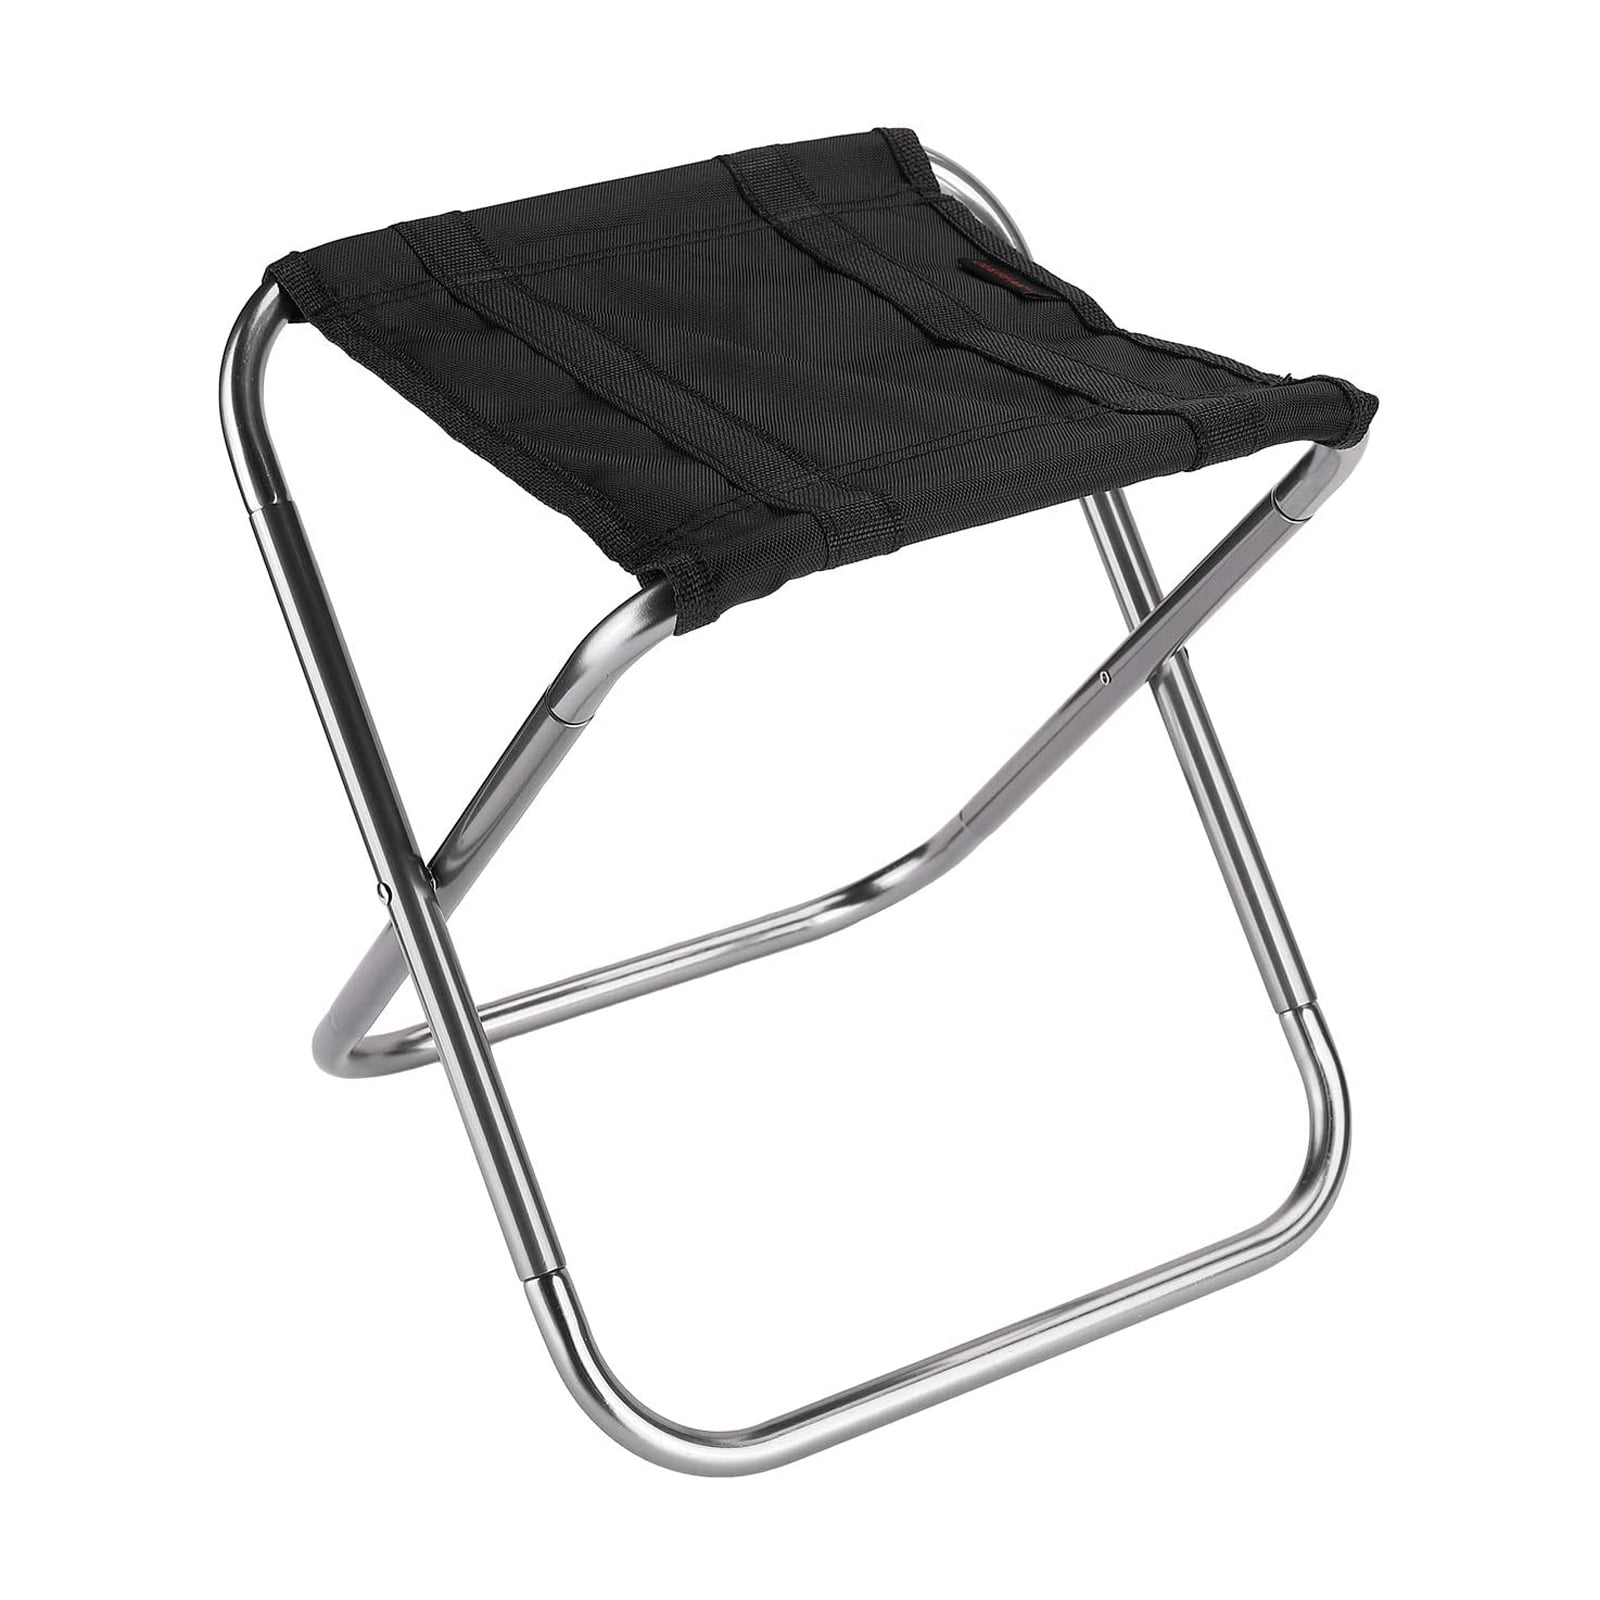 Small Folding Camping Chair Outdoor Lightweight Collapsible Chair with Carry Bag for Fishing Hiking Gardening Traveling Beach BBQ Agole Portable Folding Stool 